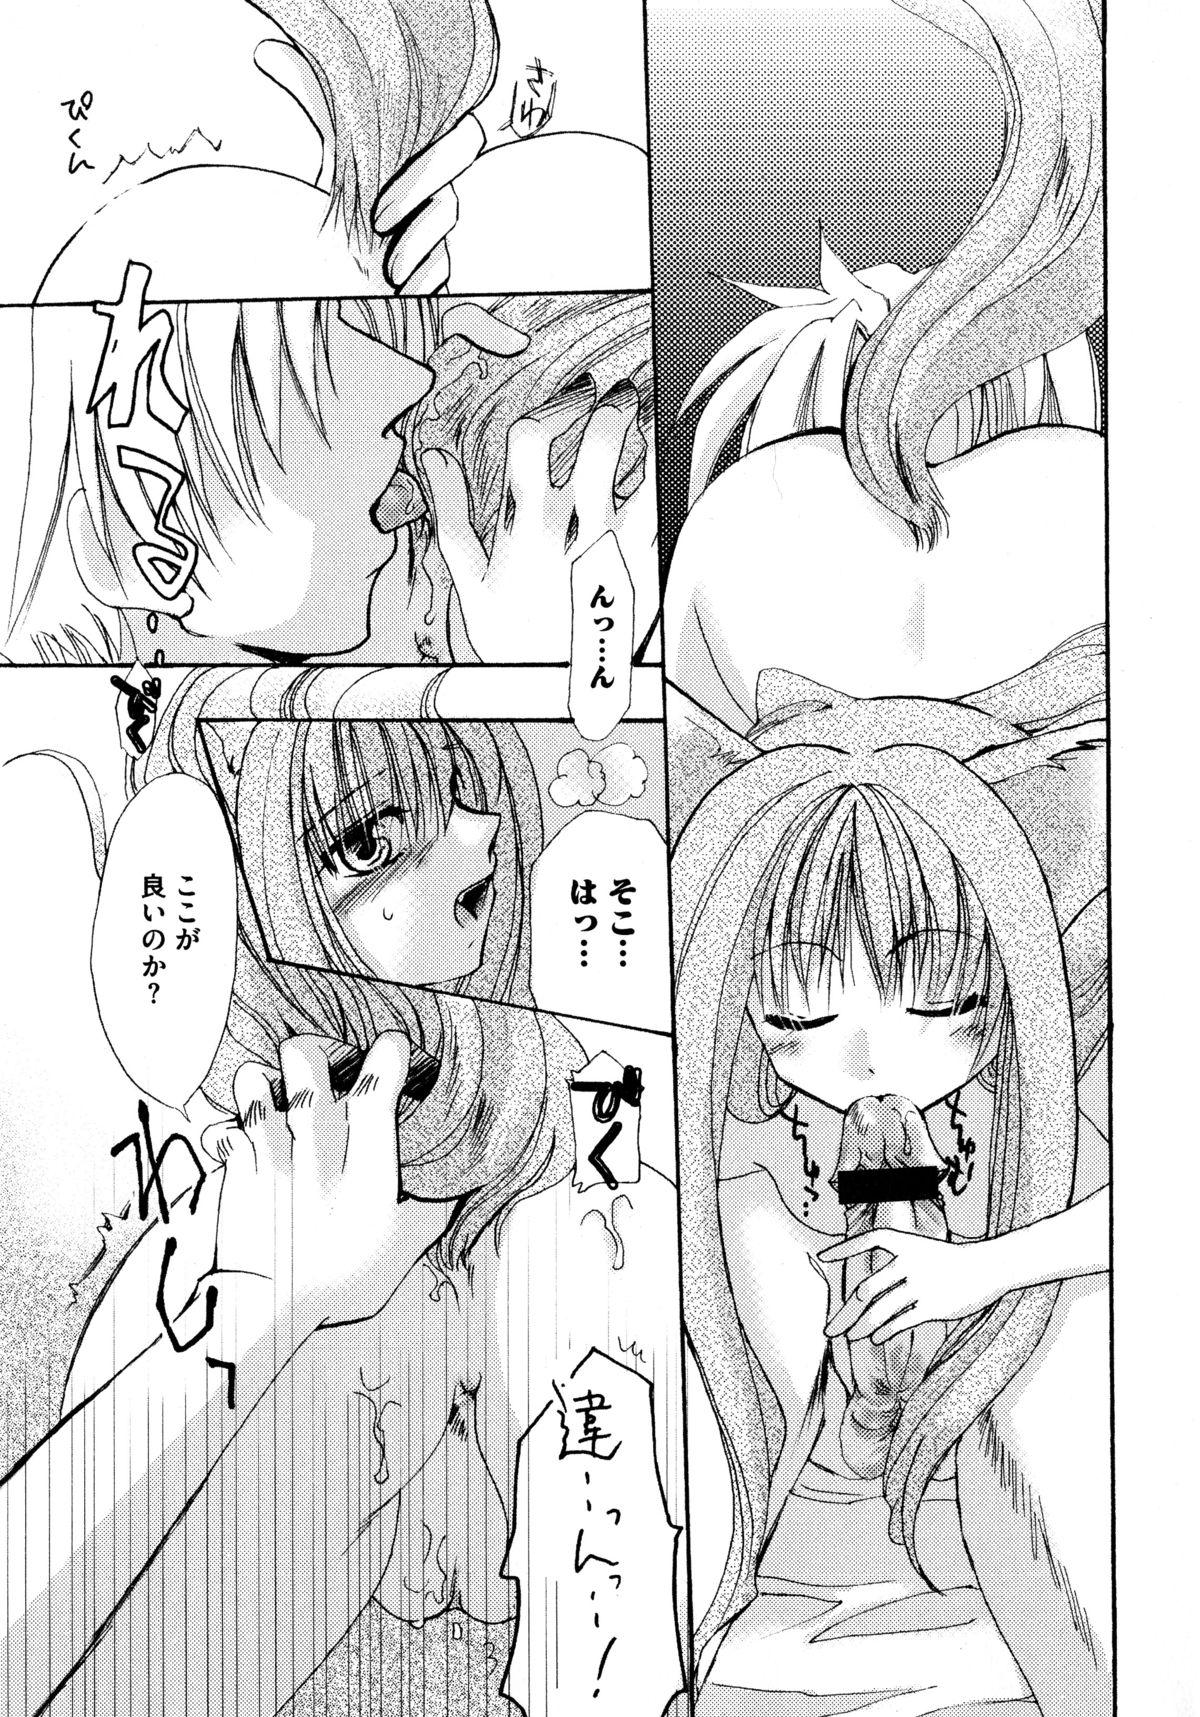 Webcam Ookami Musume to Seikou Ookami Musume Eroparo Anthology - Spice and wolf Amateur Asian - Page 12